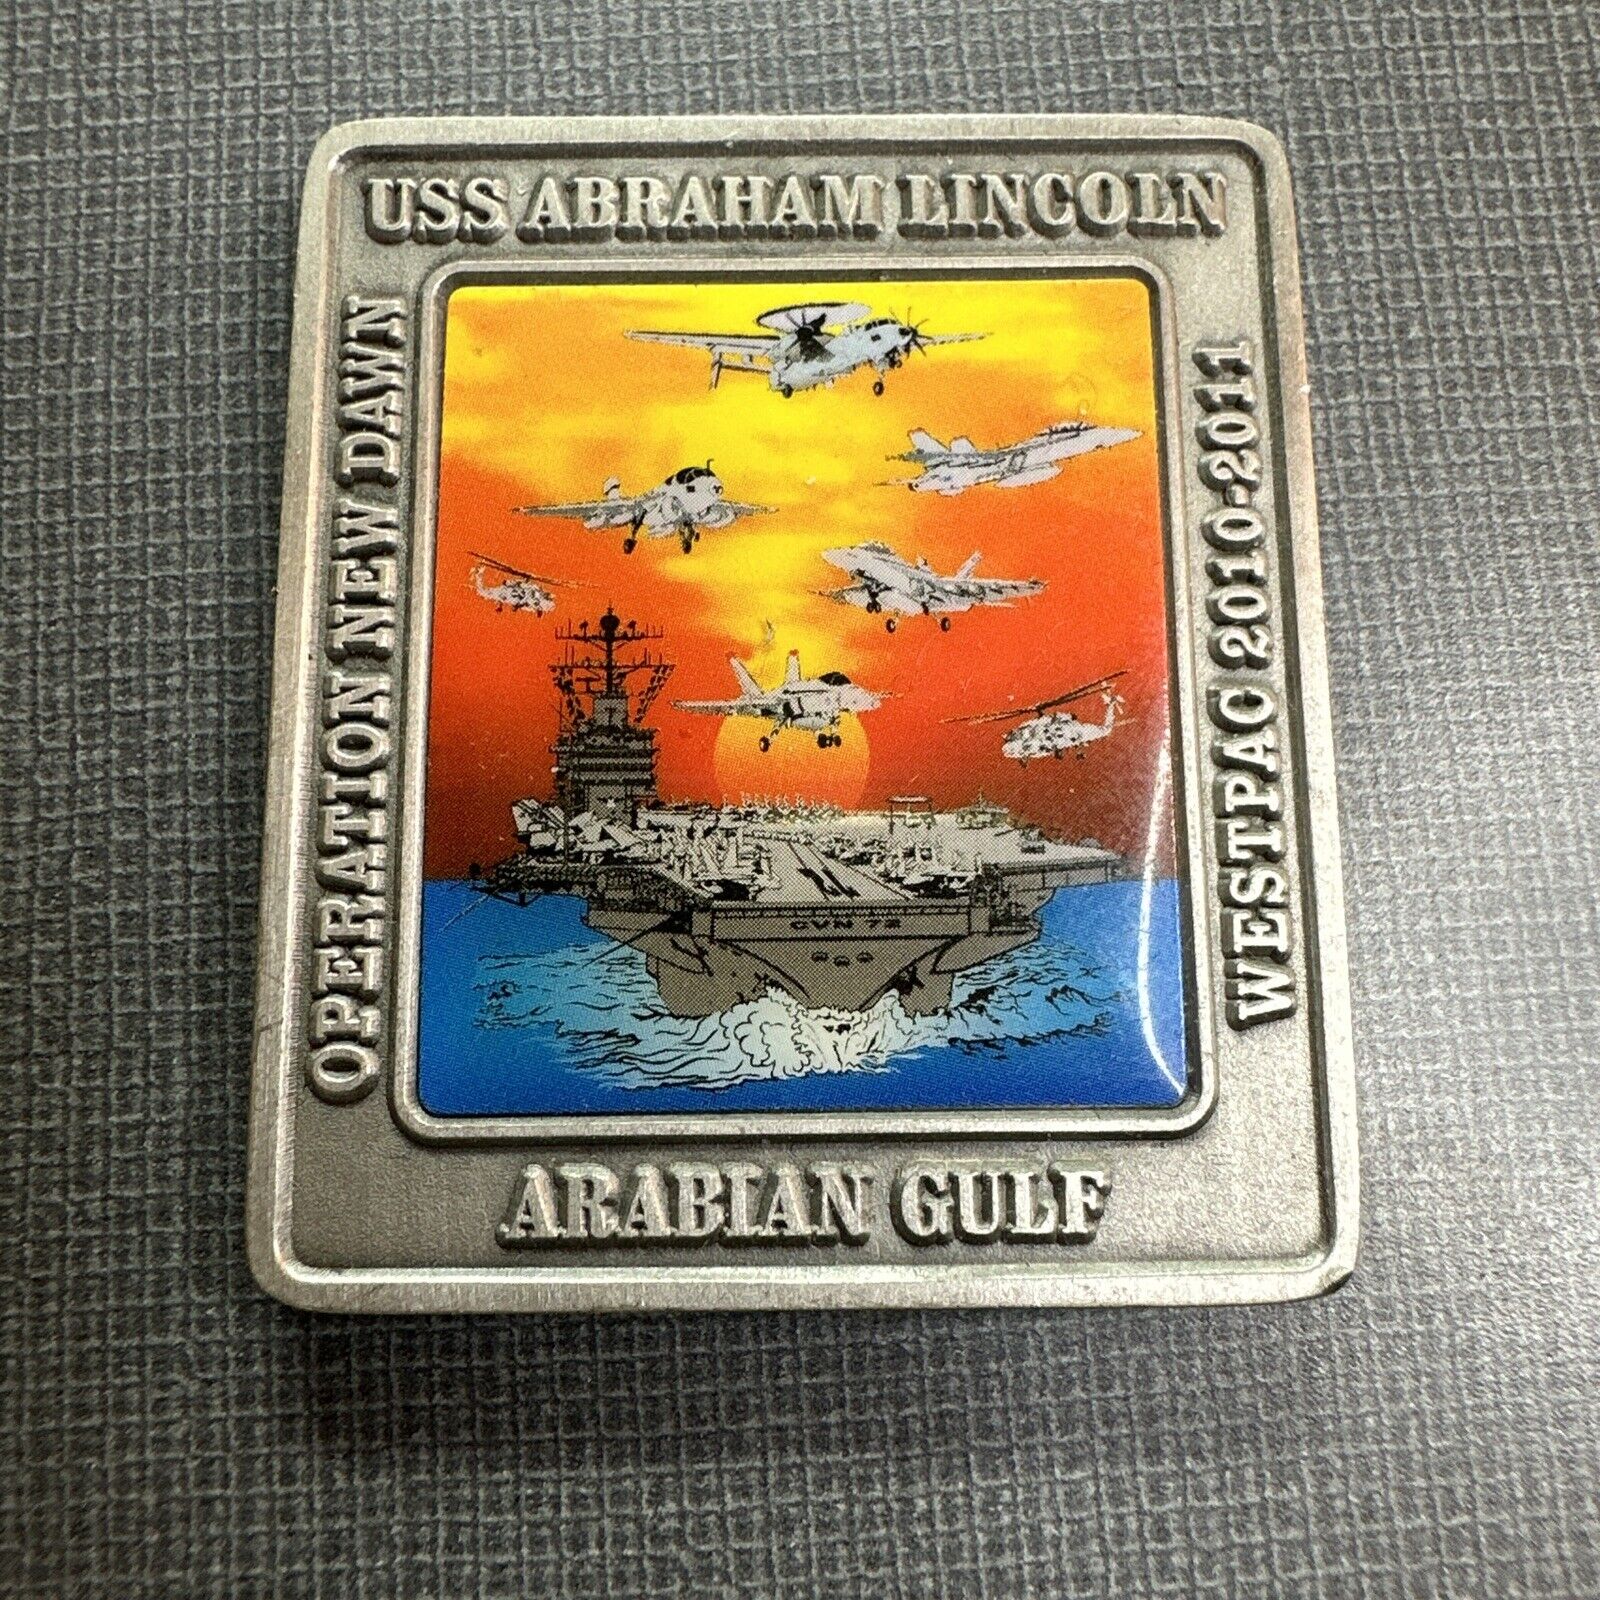 USS ABRAHAM LINCOLN CVN-72 CHALLENGE COIN - OPERATION NEW DAWN - WEST PAC 2010